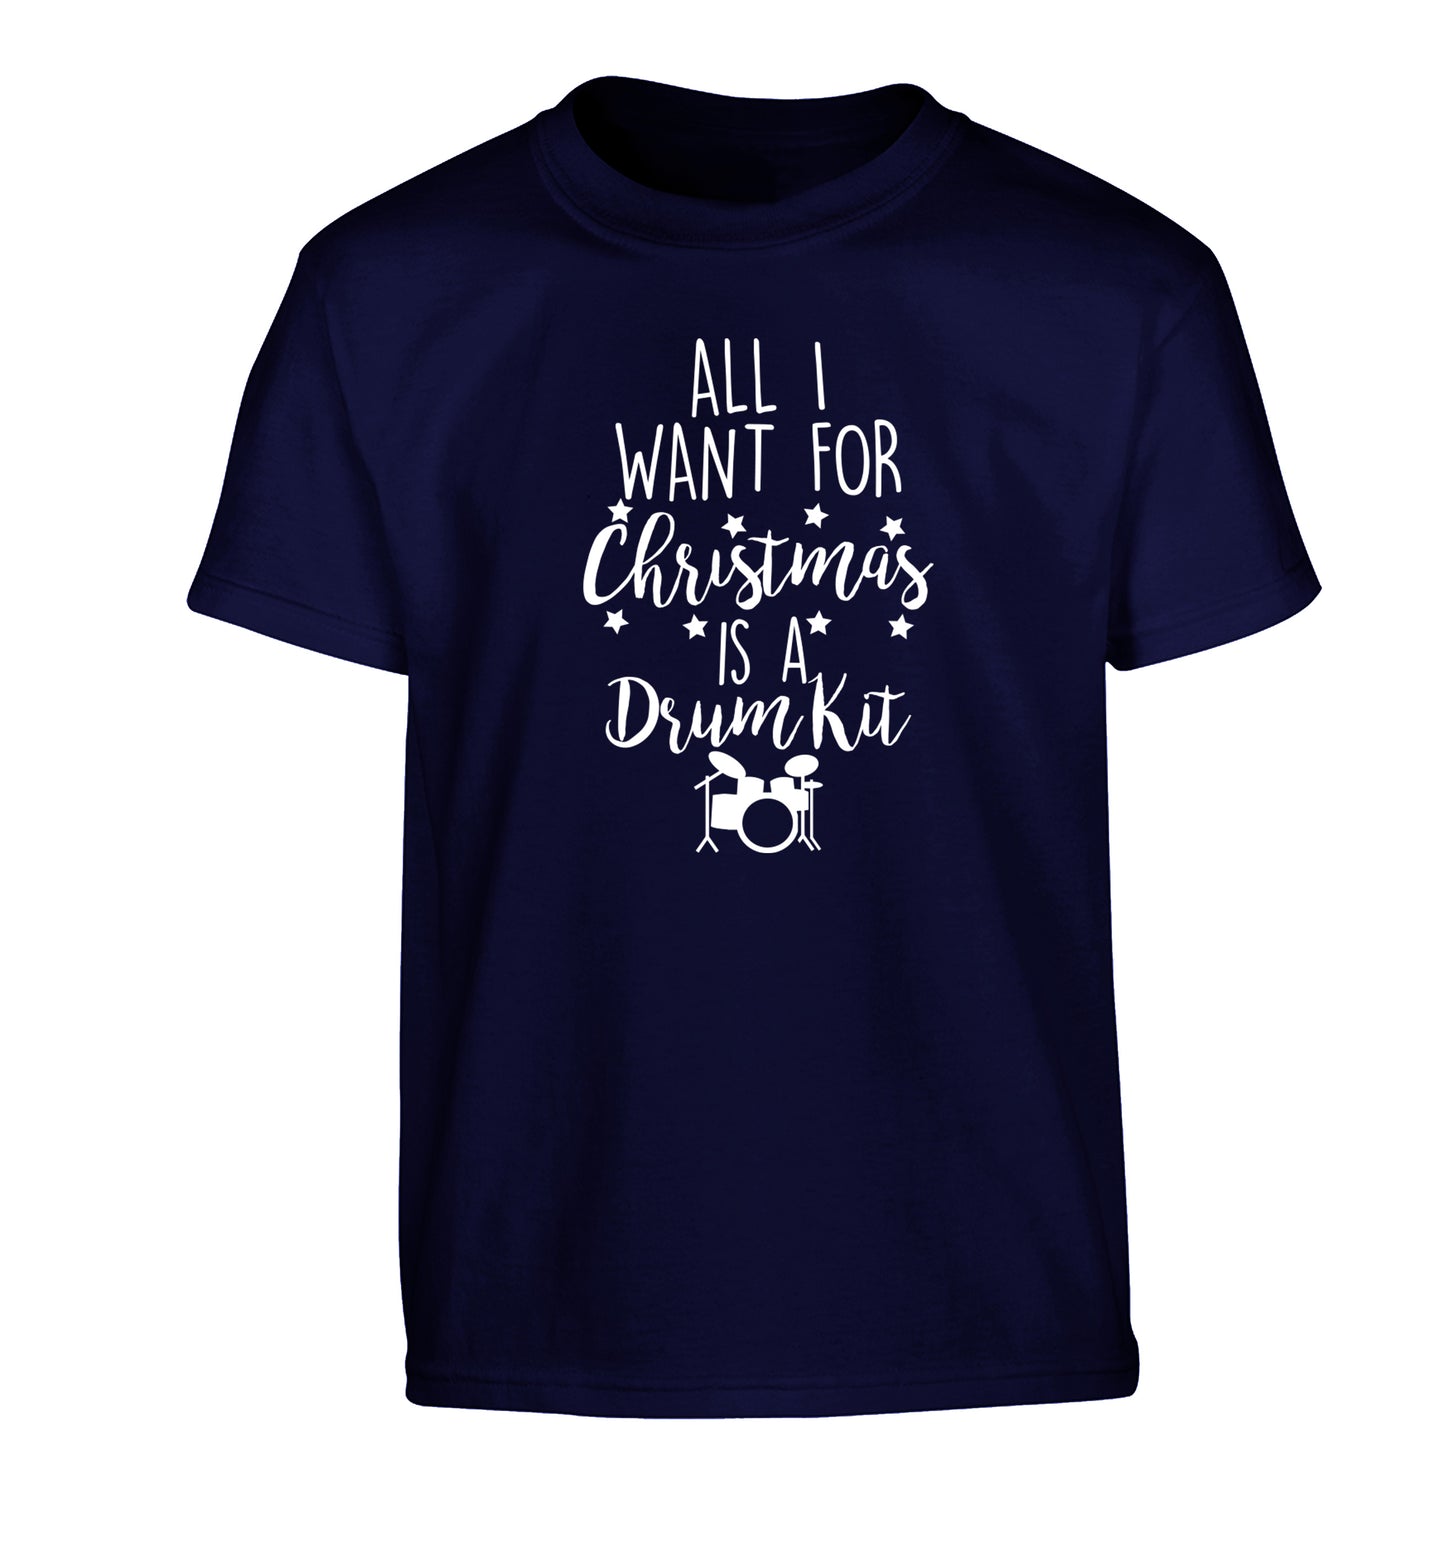 All I want for Christmas is a drum kit! Children's navy Tshirt 12-14 Years